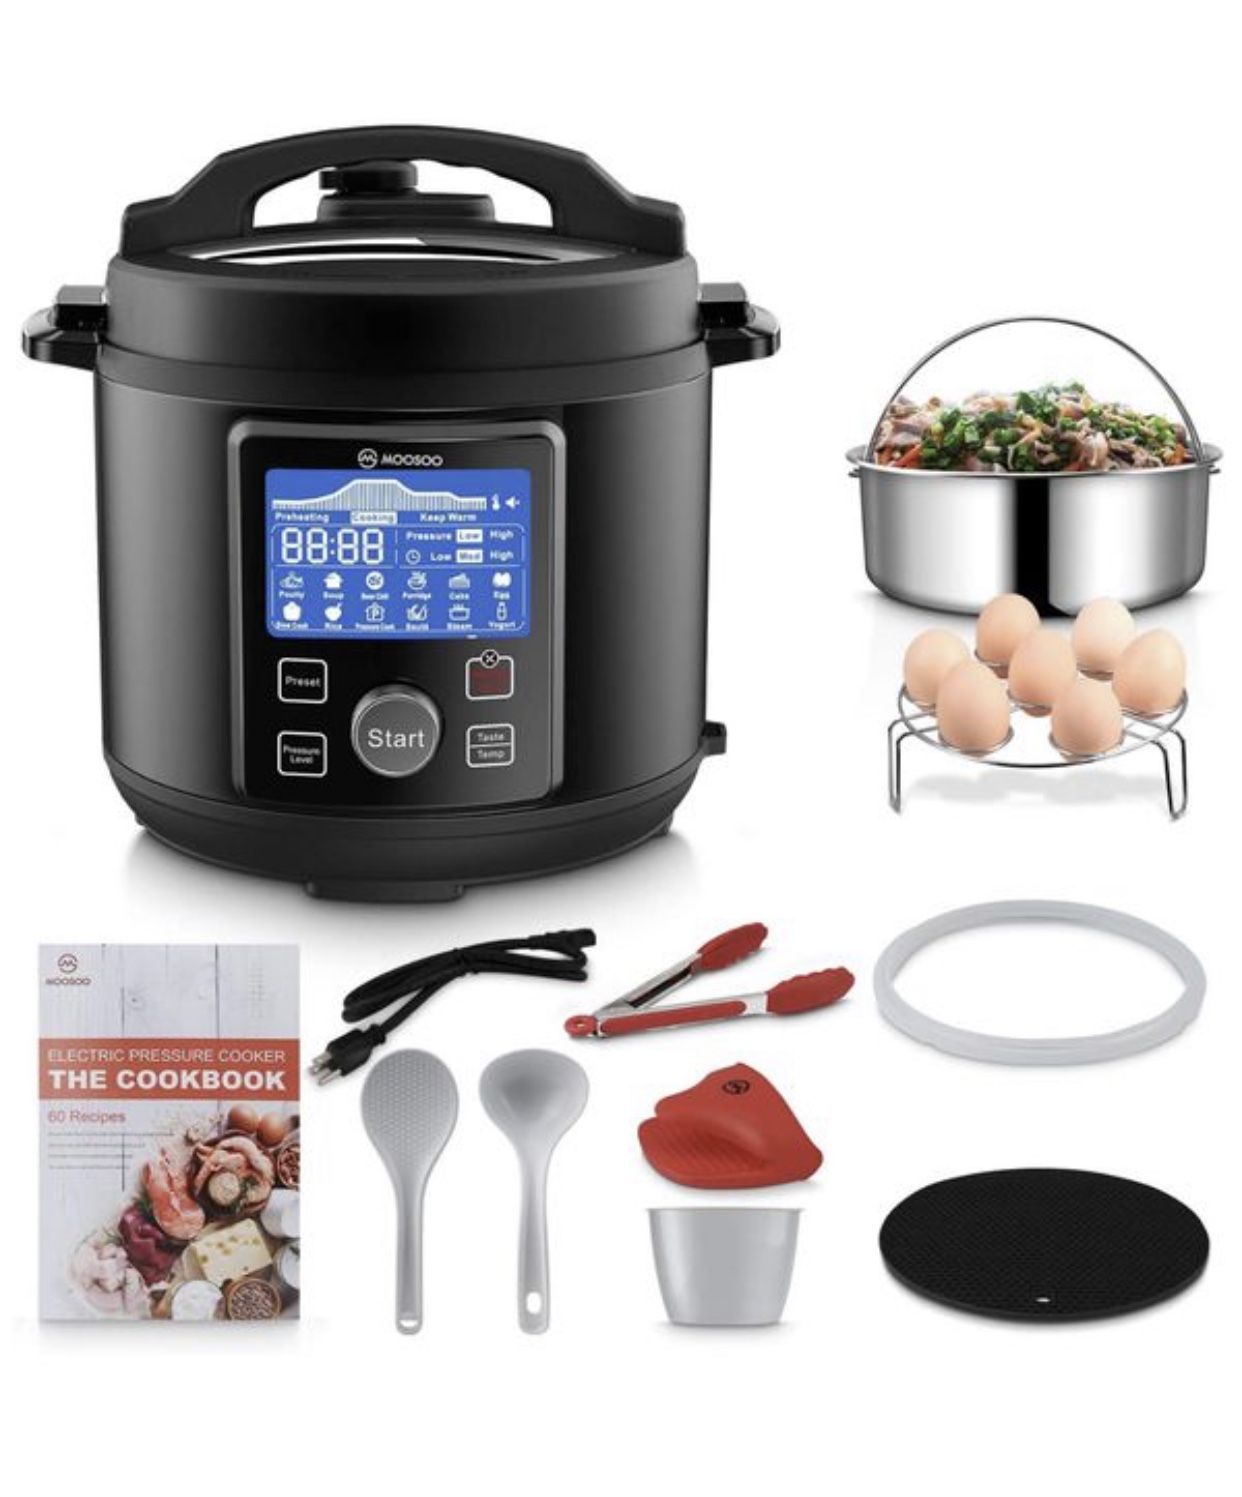 12-in-1 Electric Pressure Cooker Instant Programmable Pot